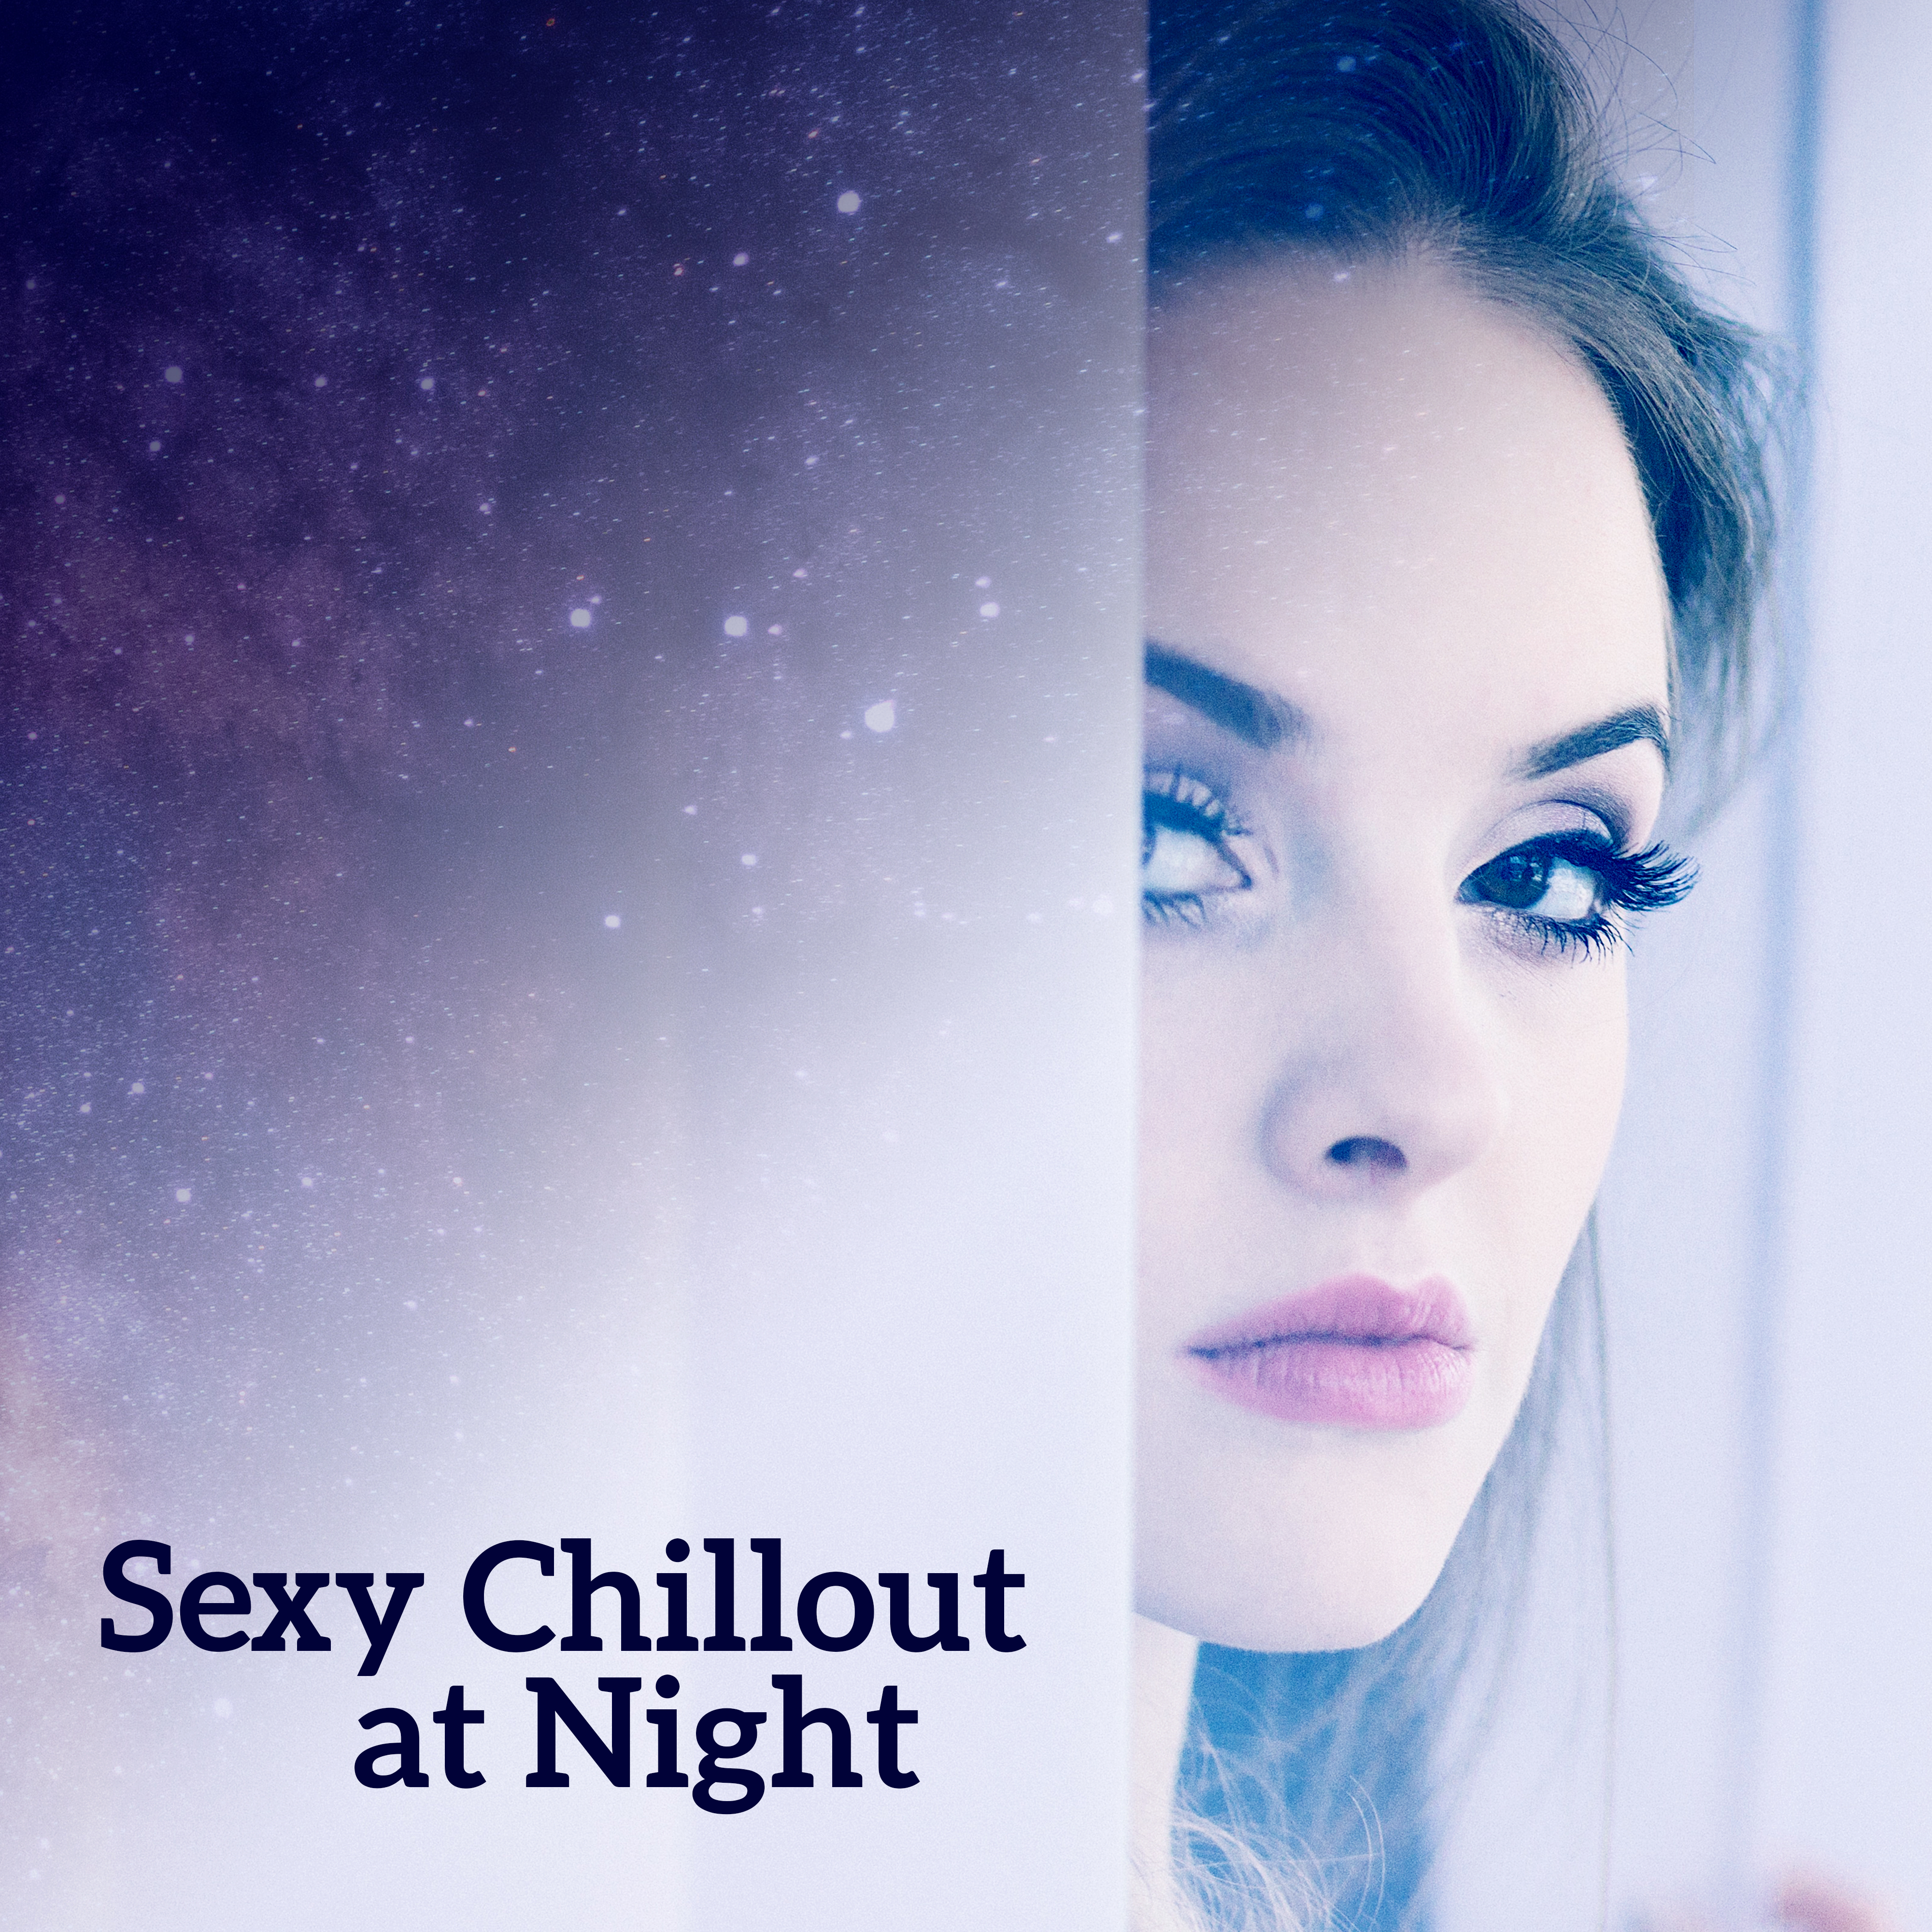 **** Chillout at Night – Music for Lovers, Making Love, Massage, Sensuality, Chill After Dark, Kamasutra